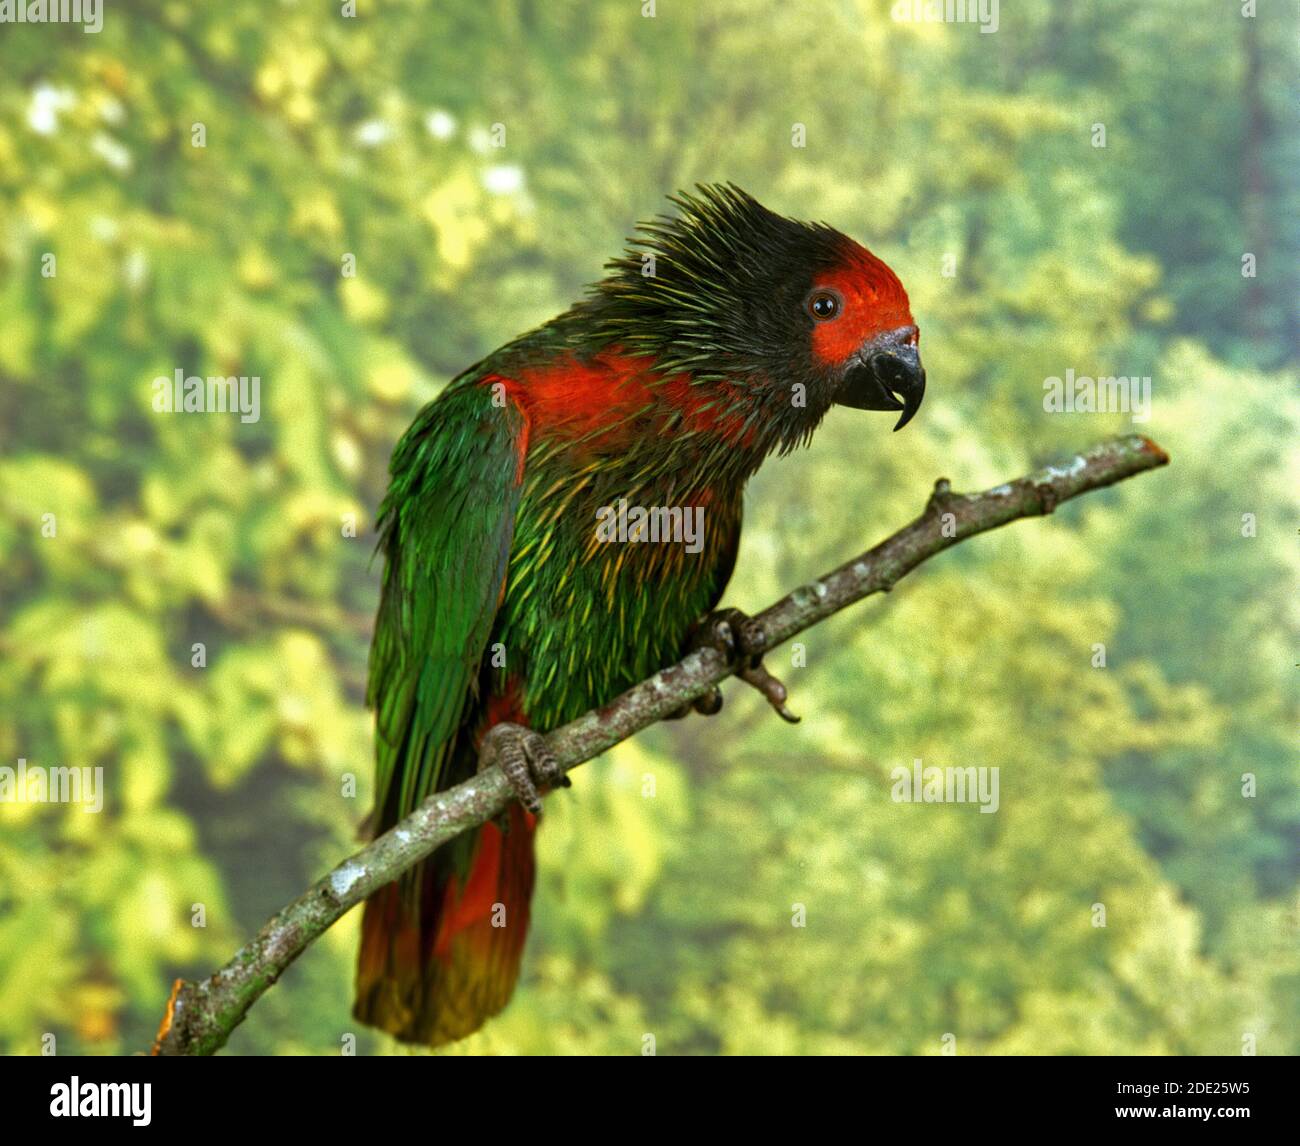 Red Fronted Lorikeet, charmosyna rubronotata, Adult standing on Branch Stock Photo